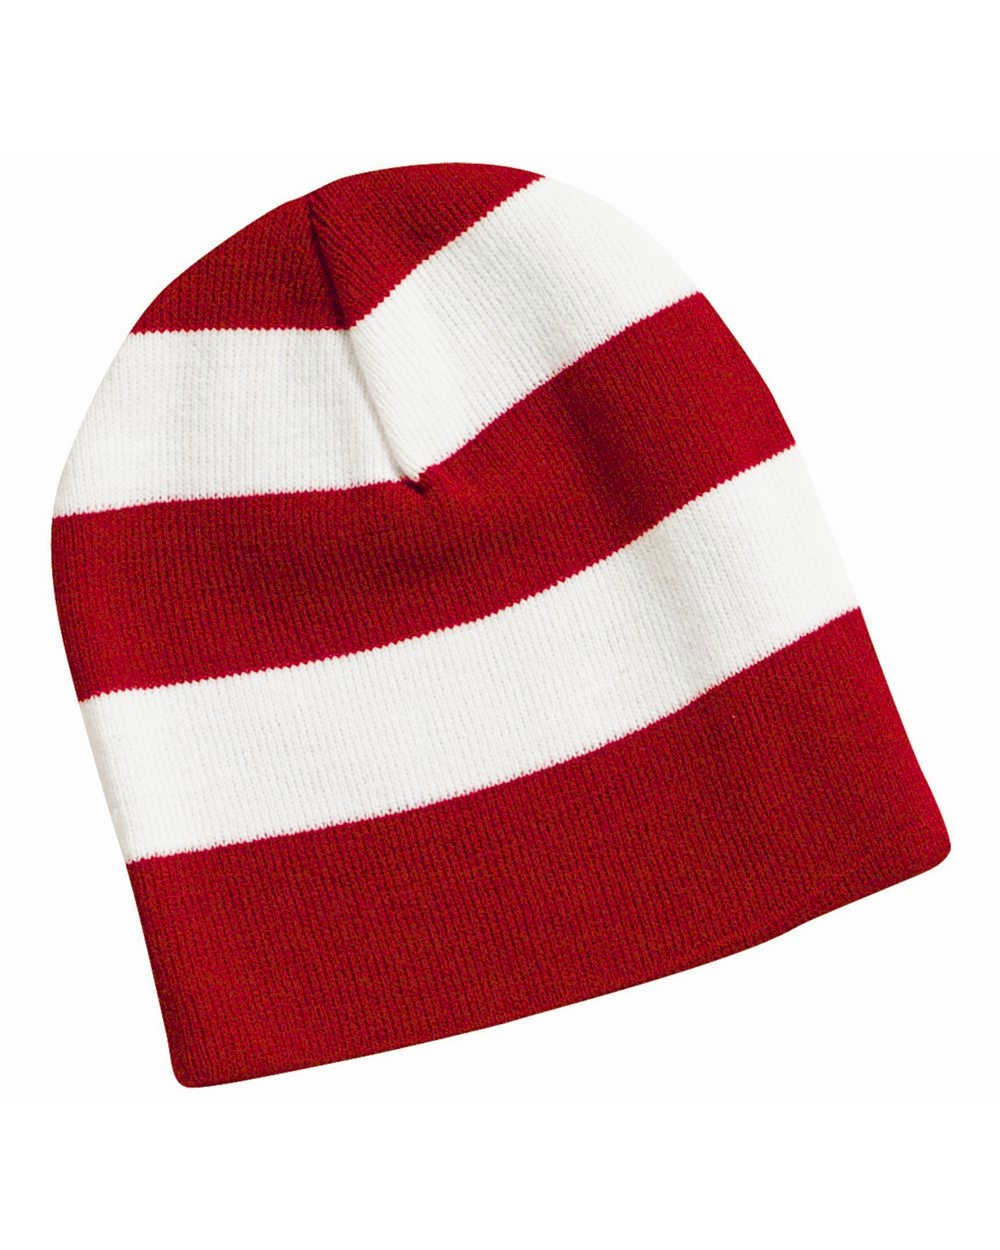 Rugby Striped Knit Beanie Embroidery Blanks - Cardinal/White